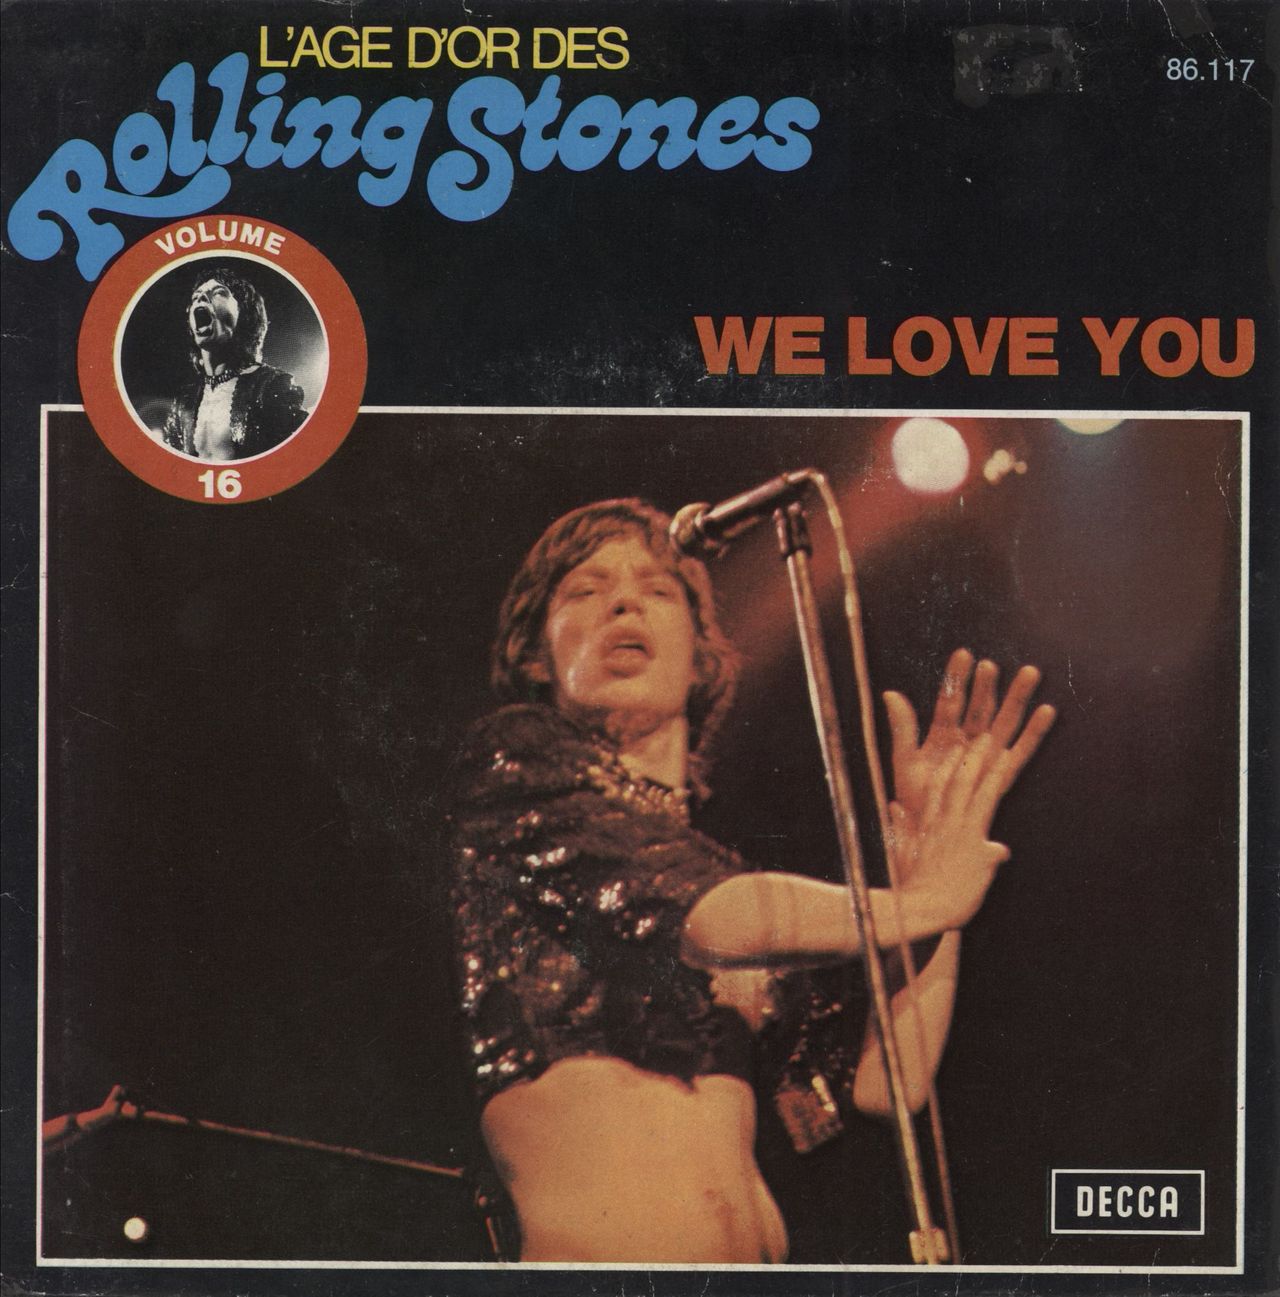 The Rolling Stones We Love You French 7" vinyl single (7 inch record / 45) 86.117